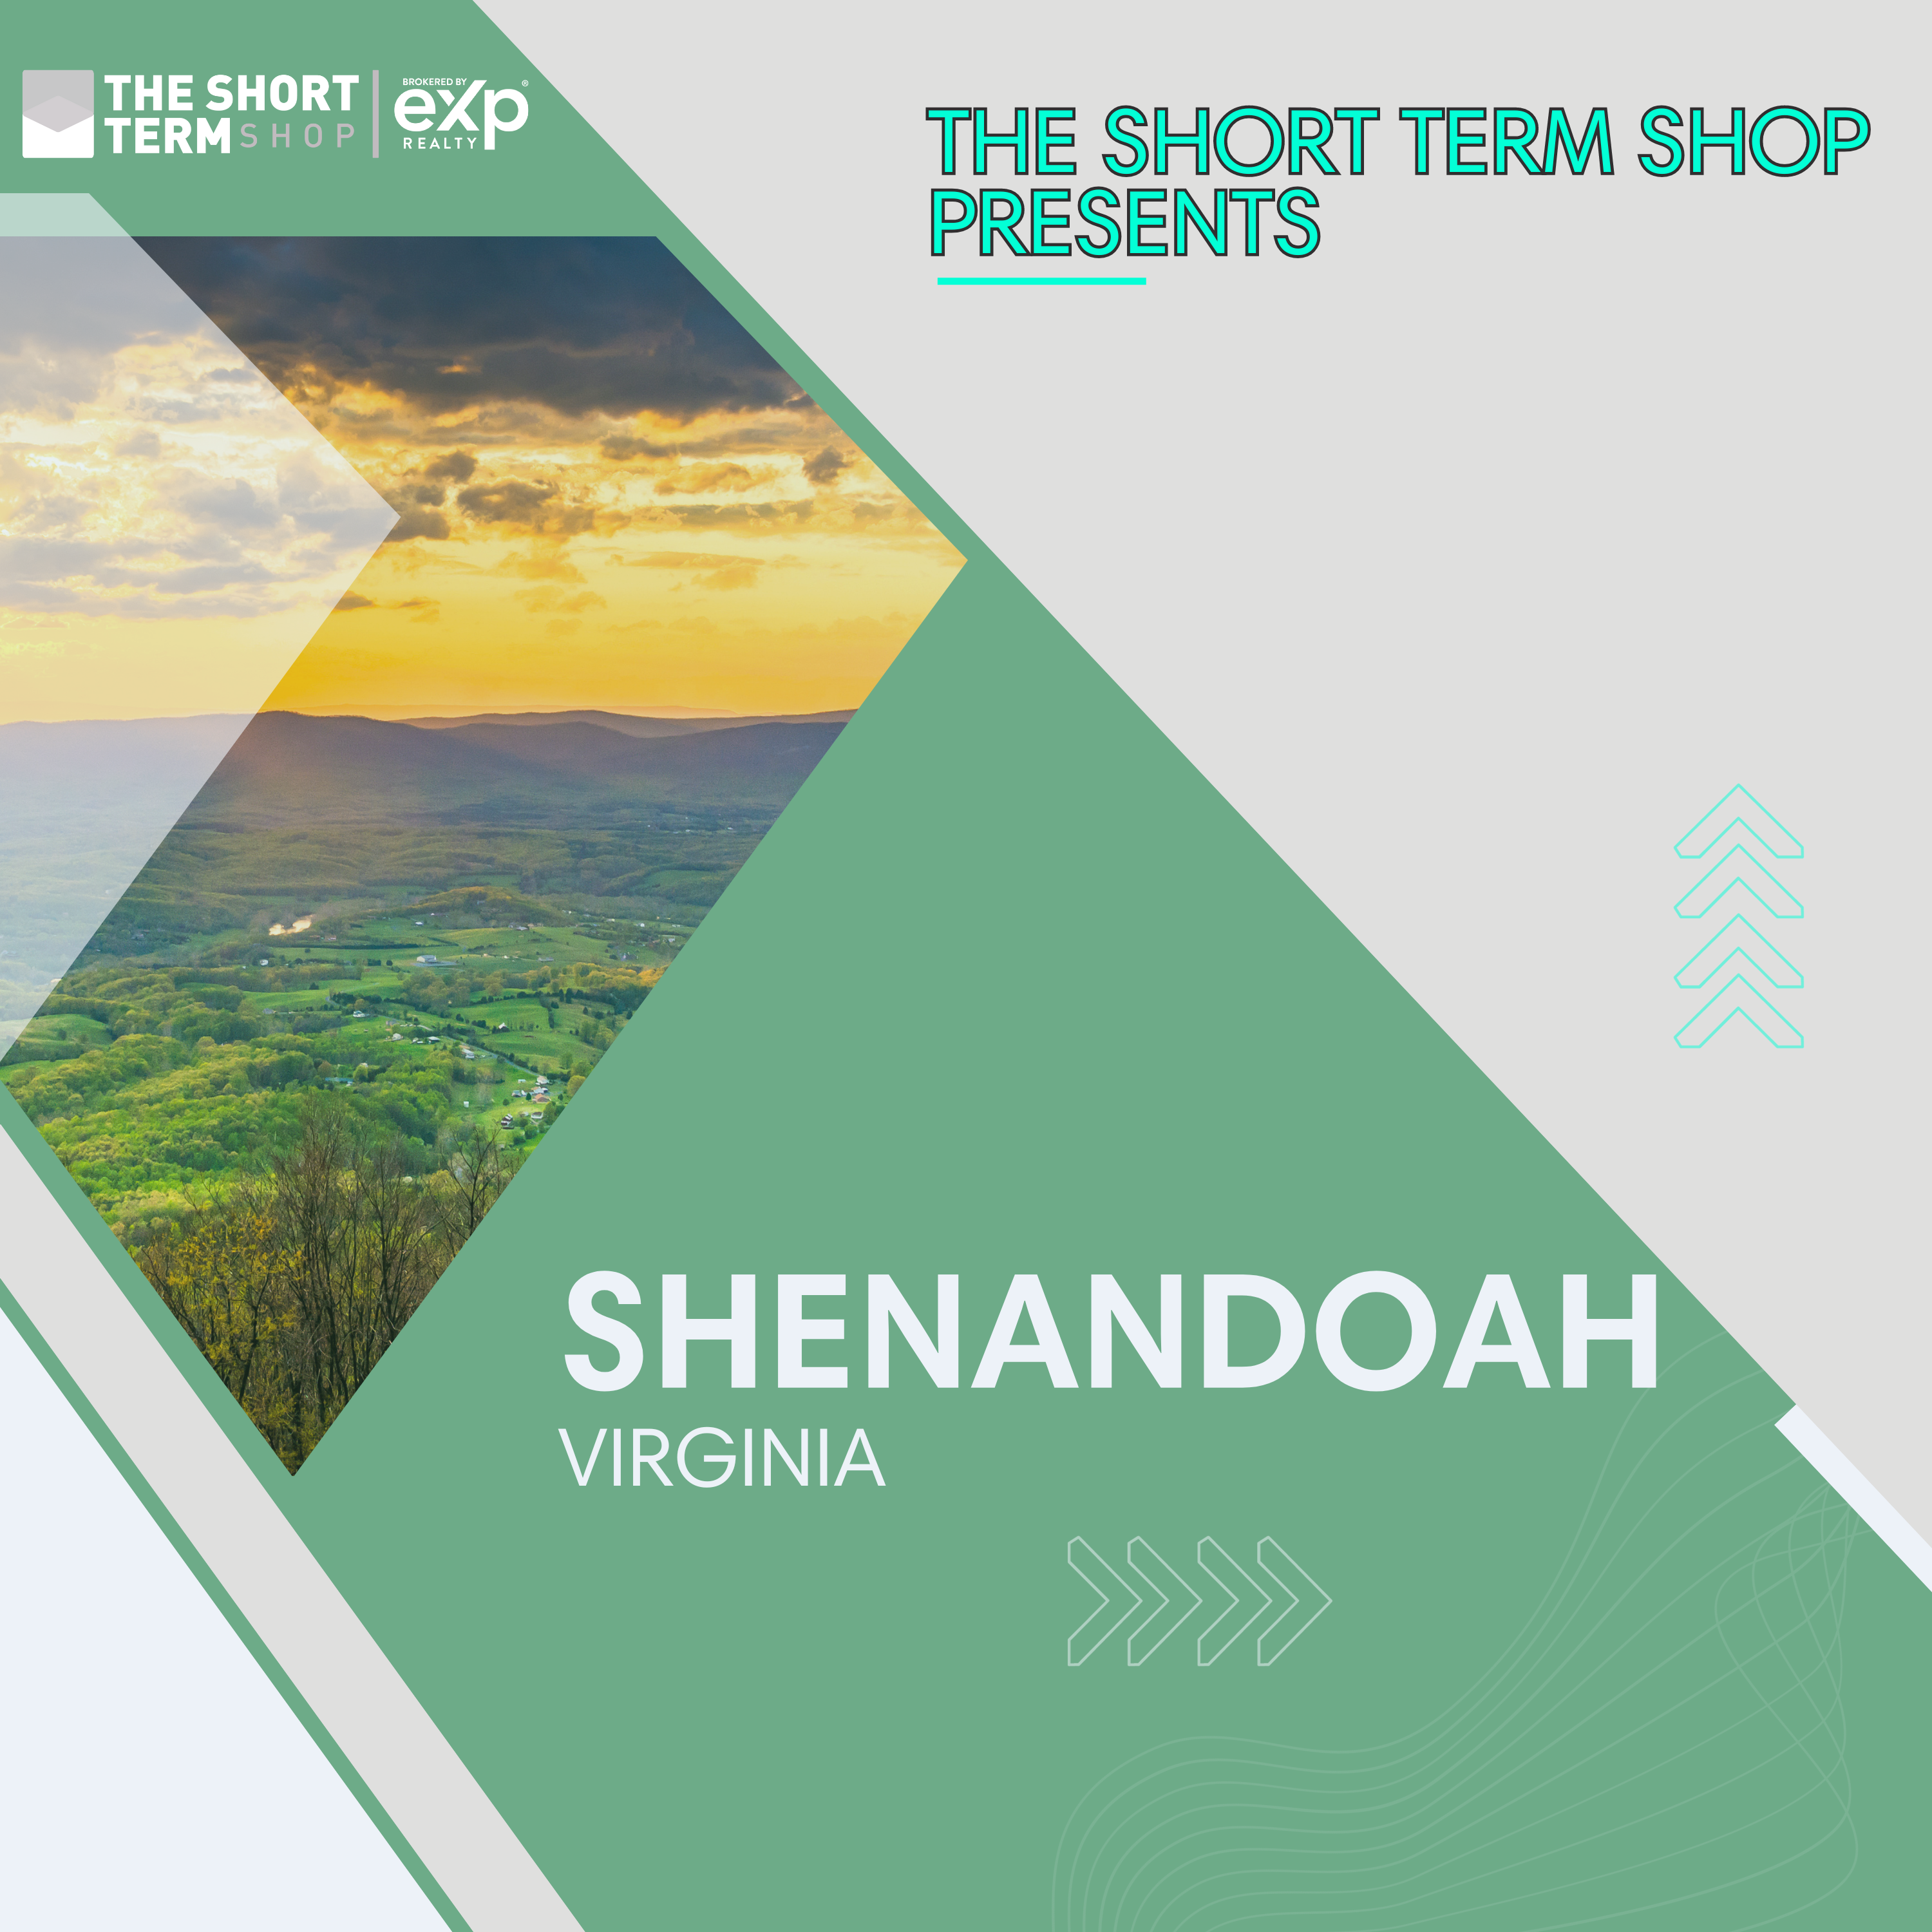 The Real Estate Contract Process When Investing in Short Term Rentals in Shenandoah, Virginia